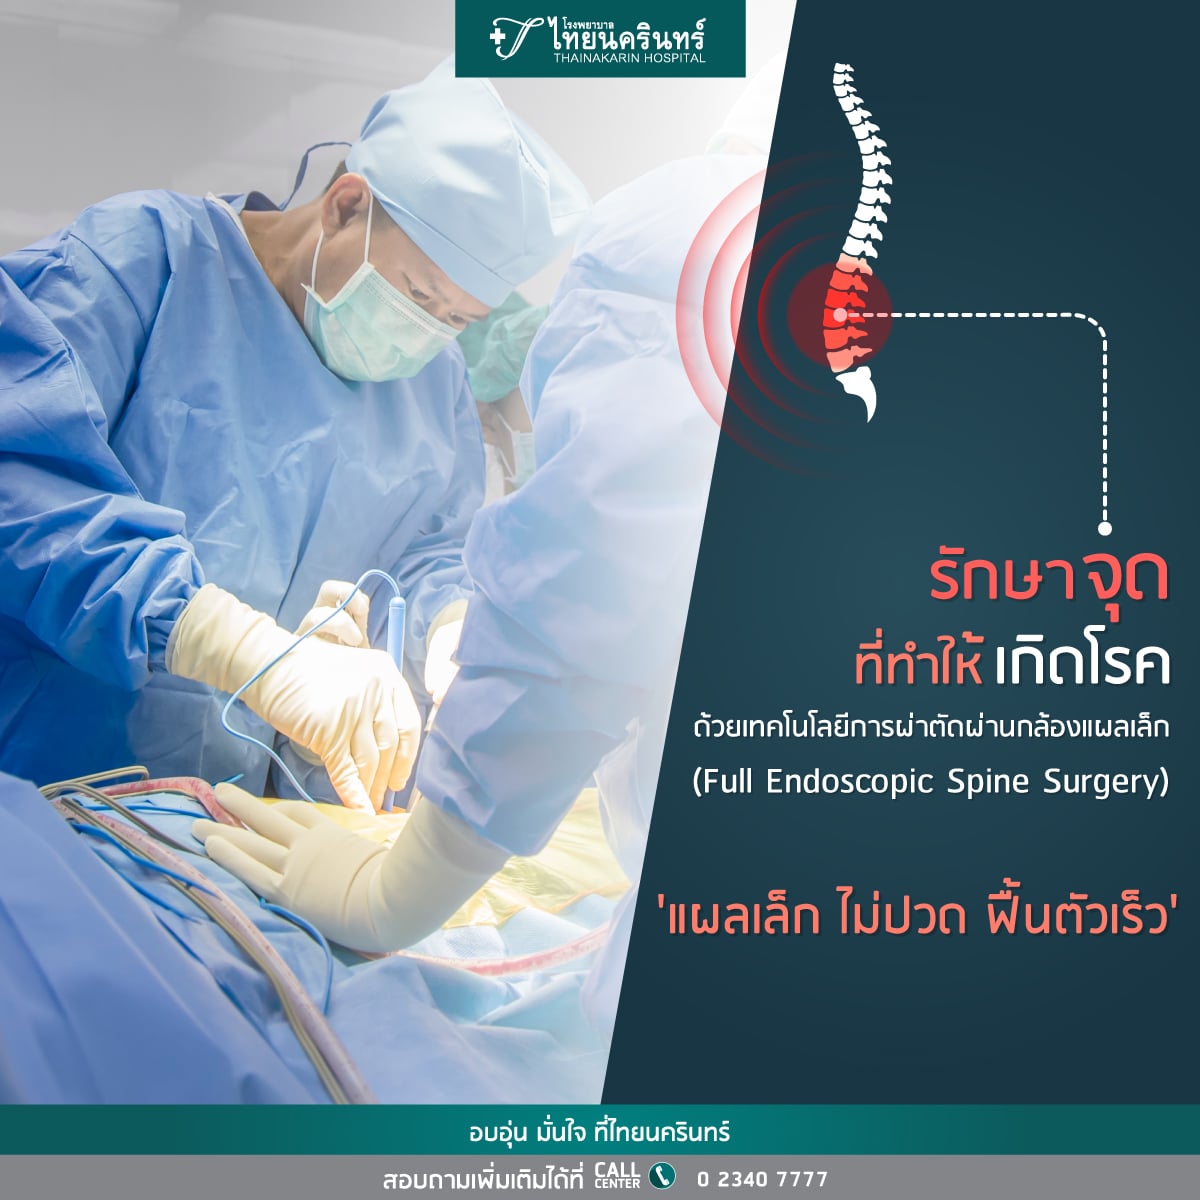 Full endoscopic spine surgery